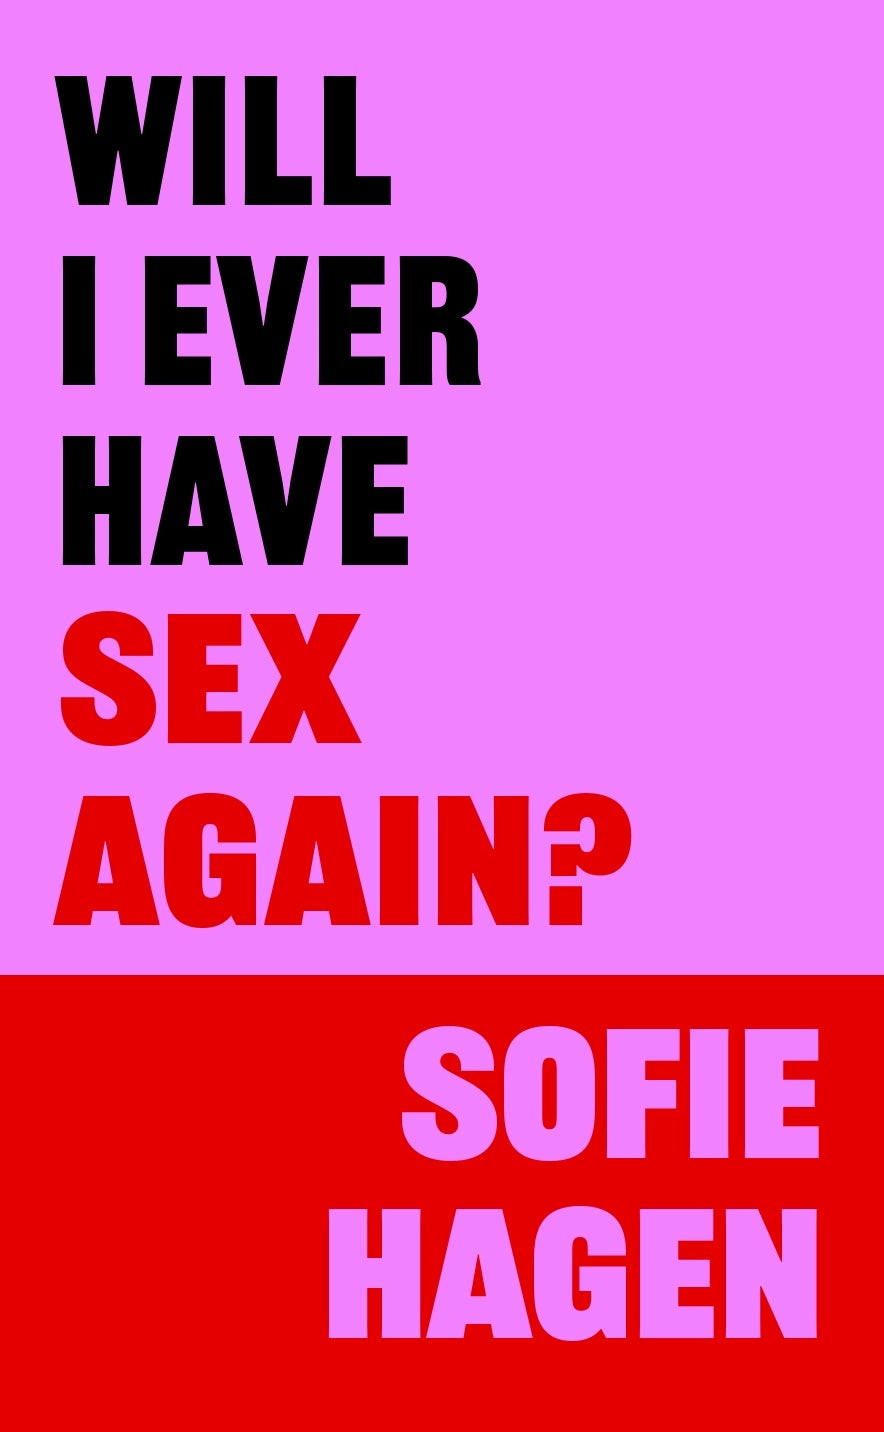 Sofie Hagen’s ‘Will I Ever Have Sex Again?’